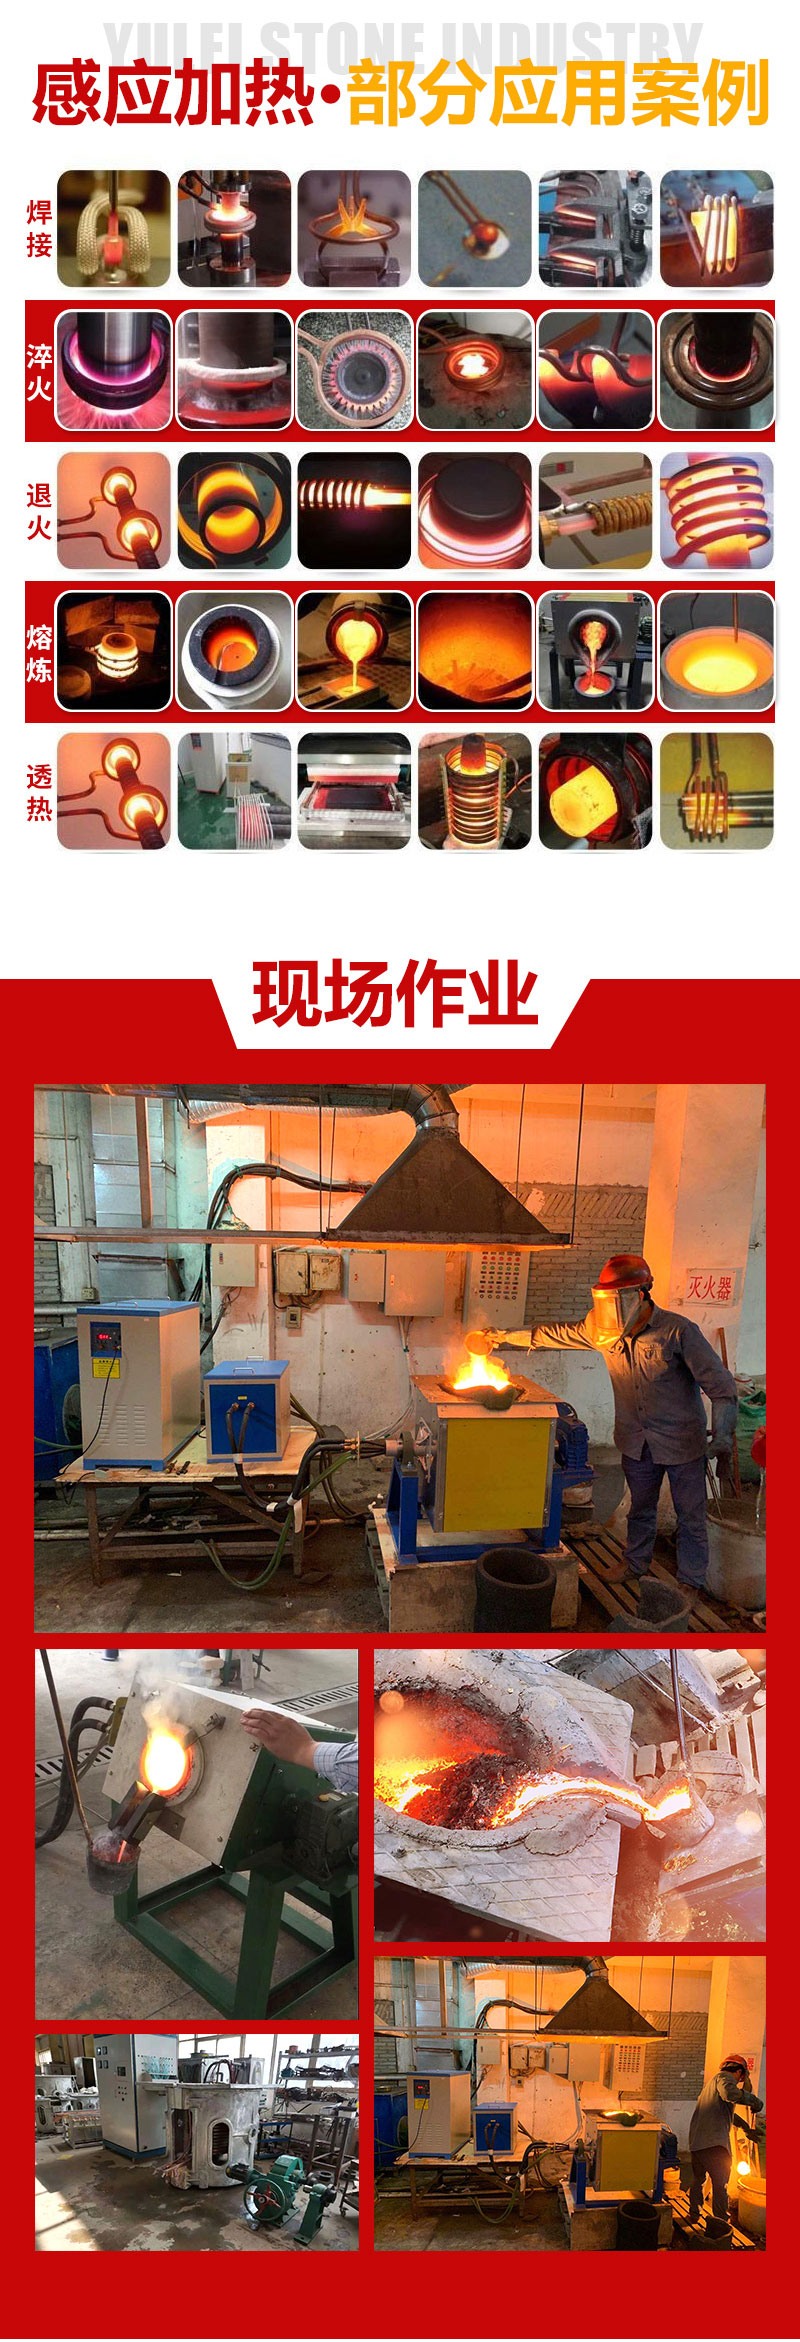 Ultra high frequency induction heater energy-saving and environmentally friendly thermal oil electric heating equipment